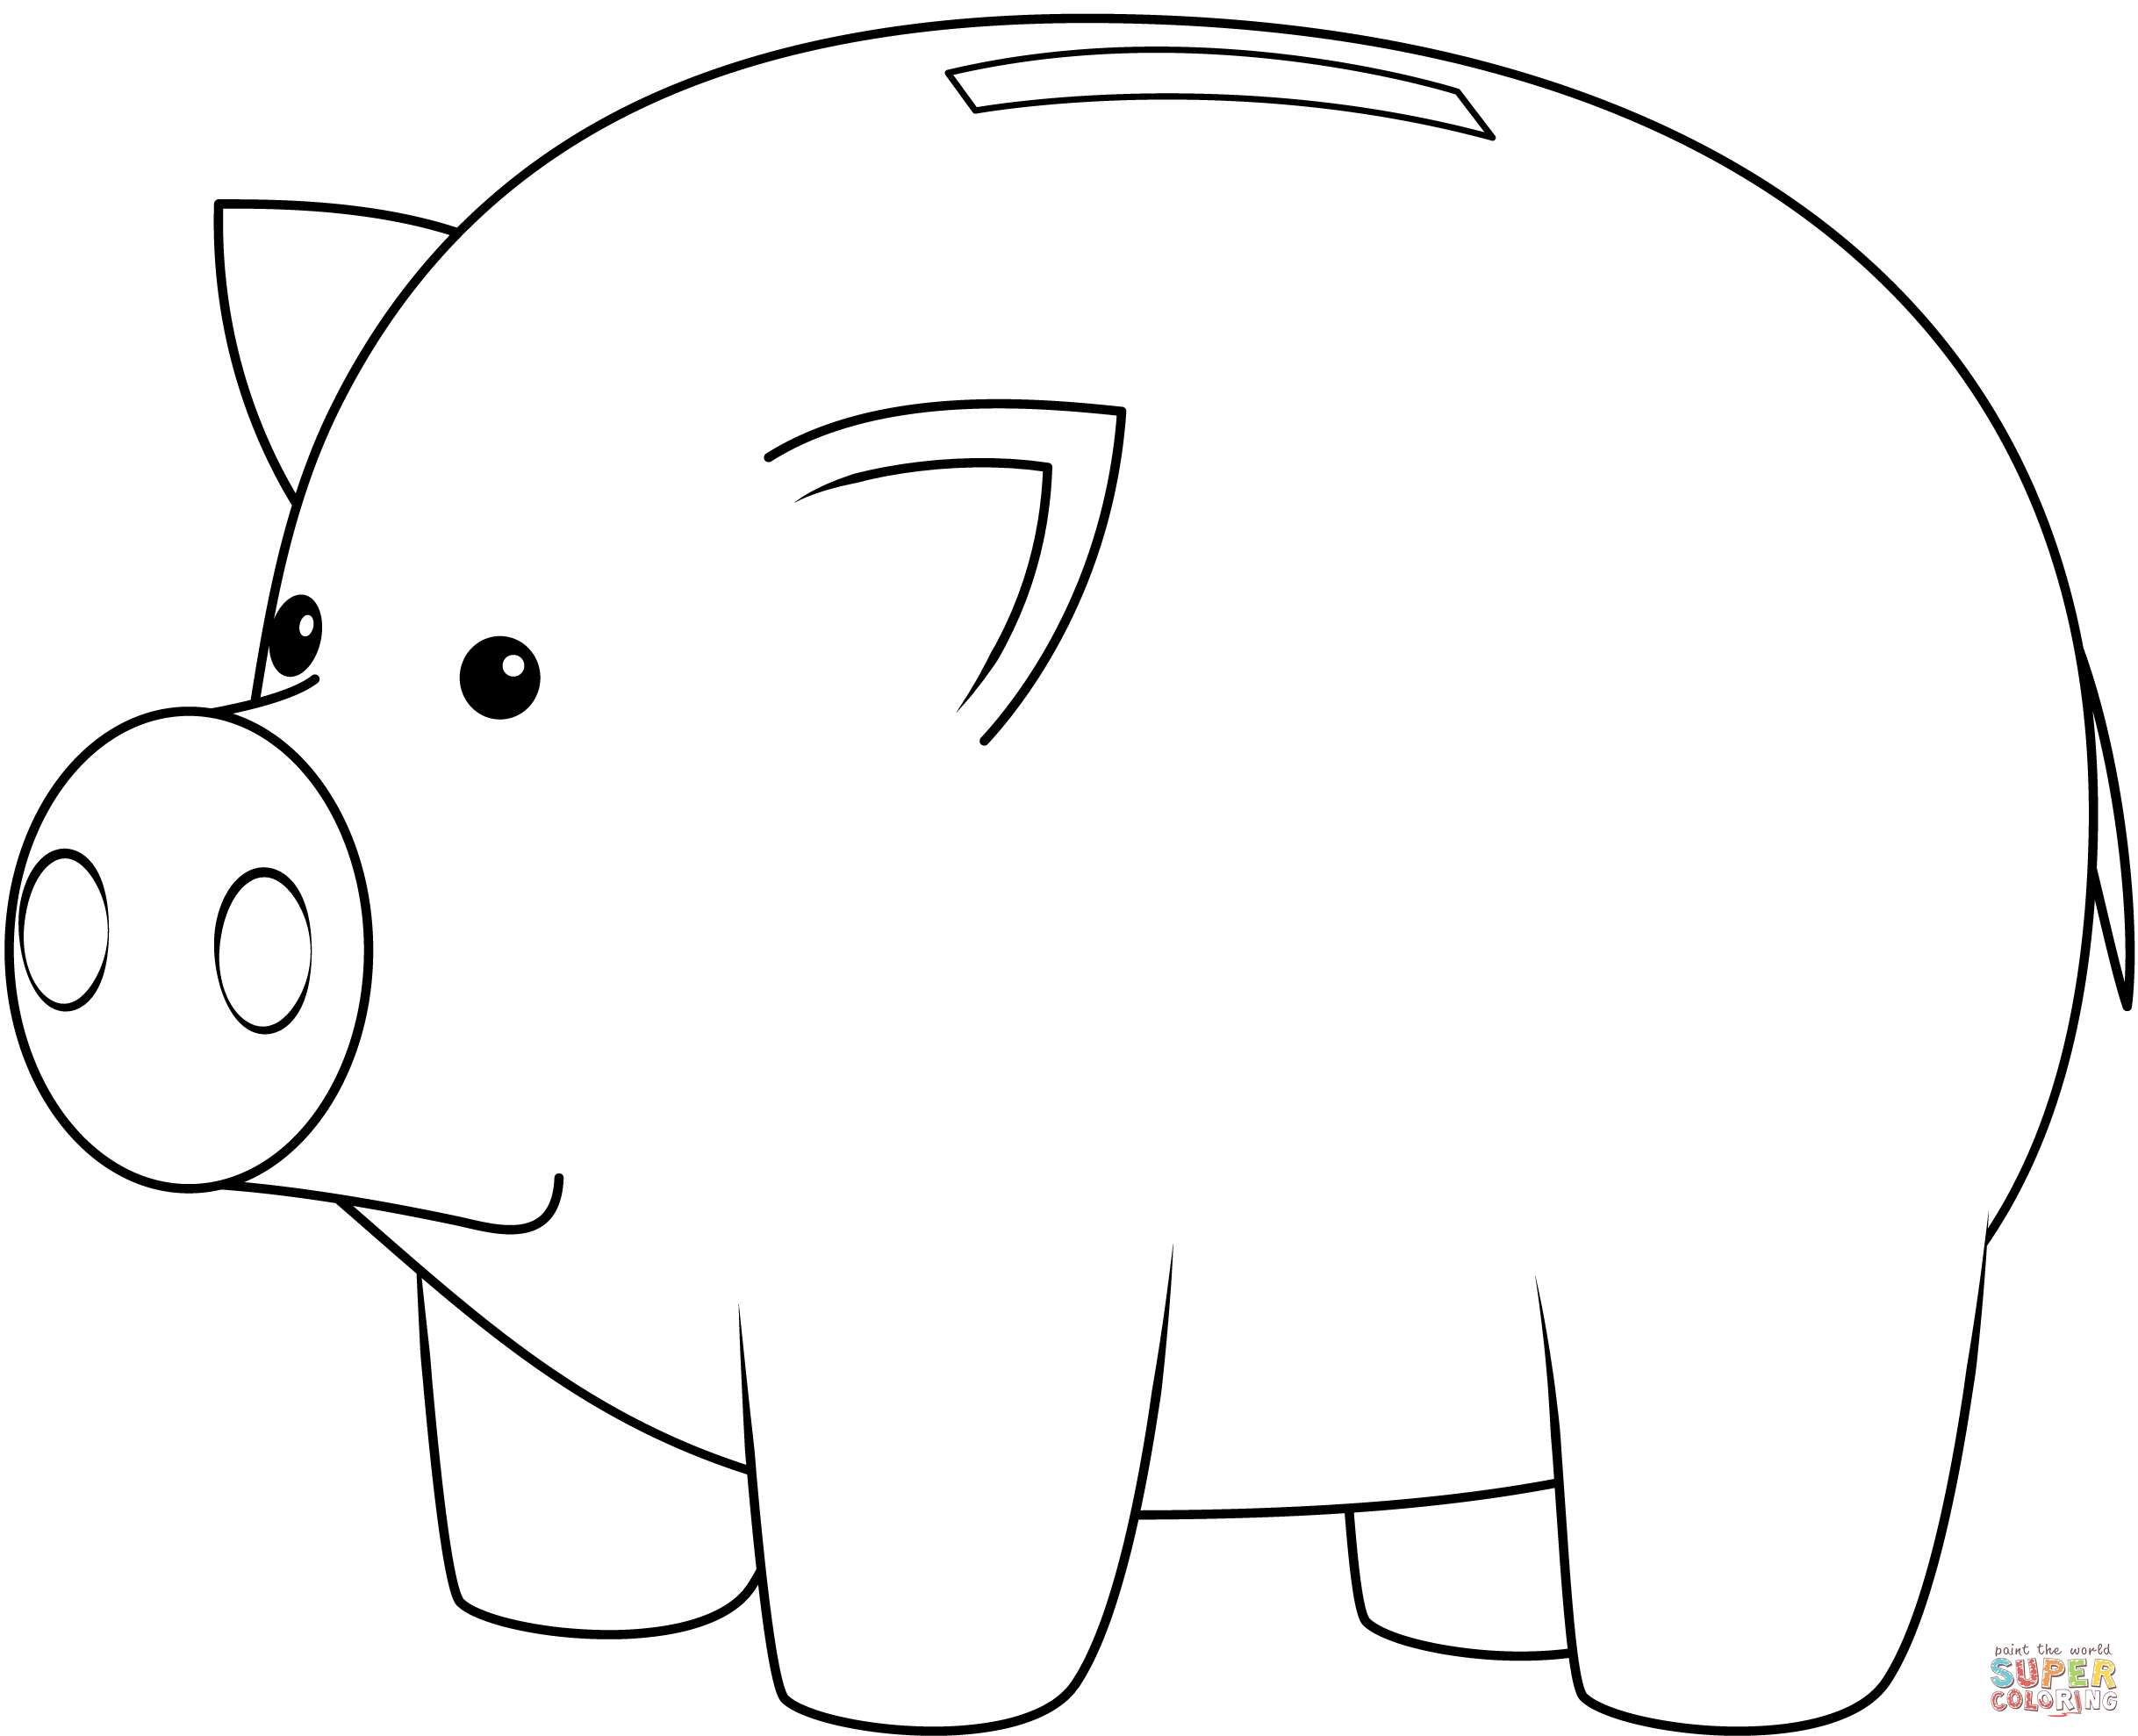 Piggy bank coloring page free printable coloring pages